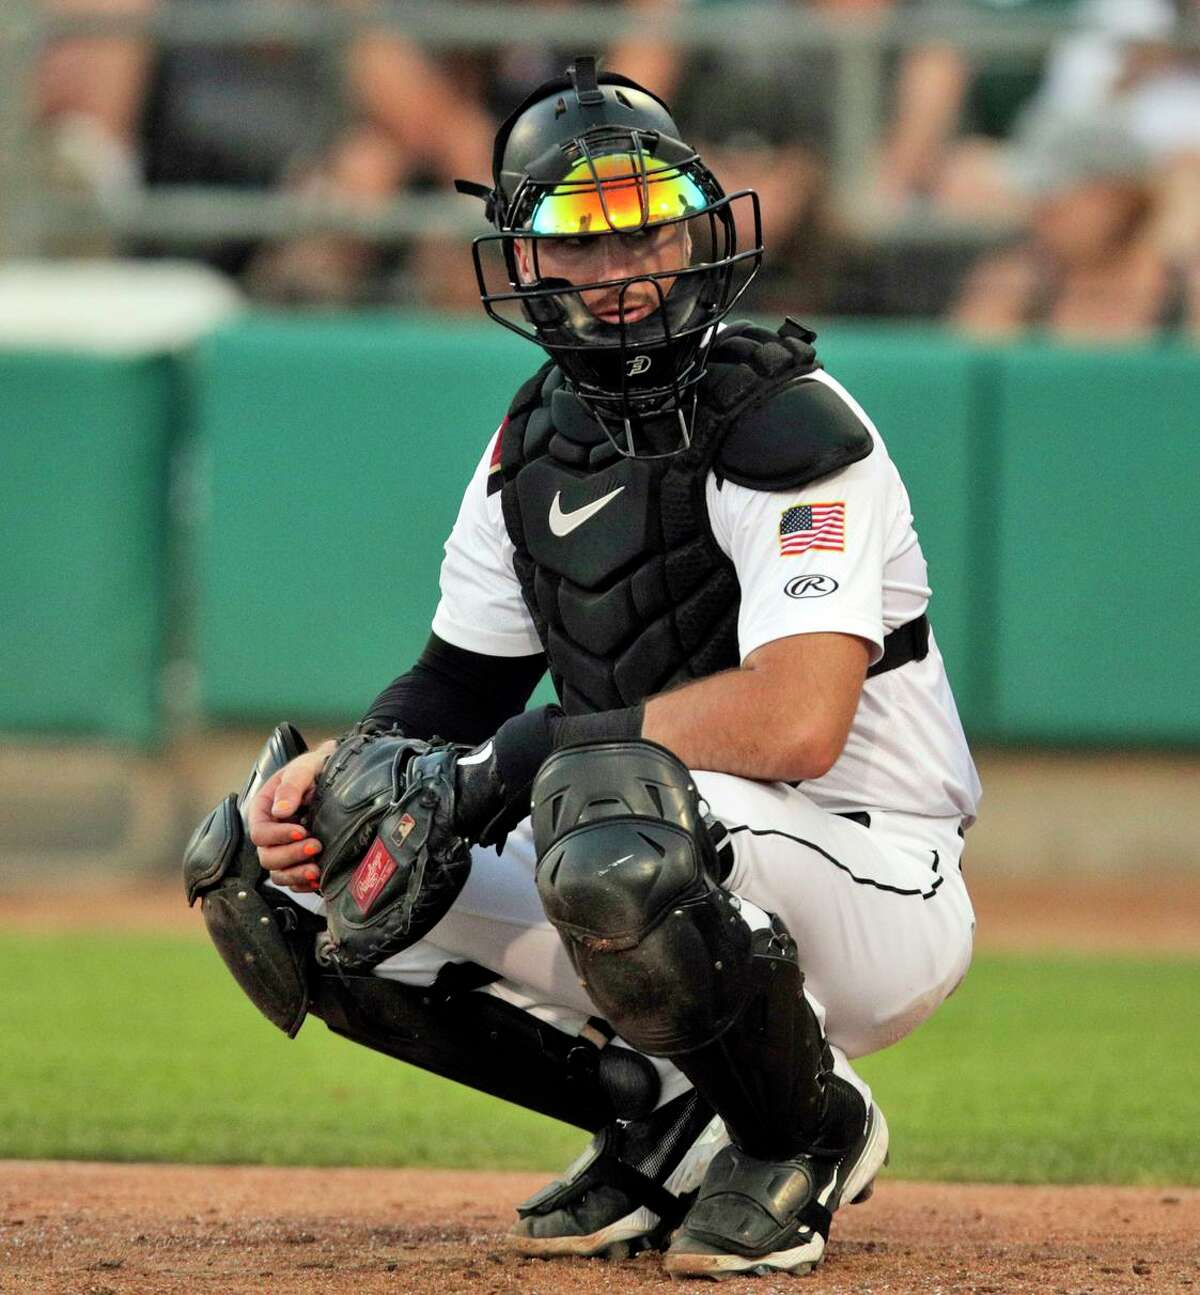 Catcher Joey Bart has not played many games since being sent down by the Giants, instead spending time with coaches to revamp his swing.